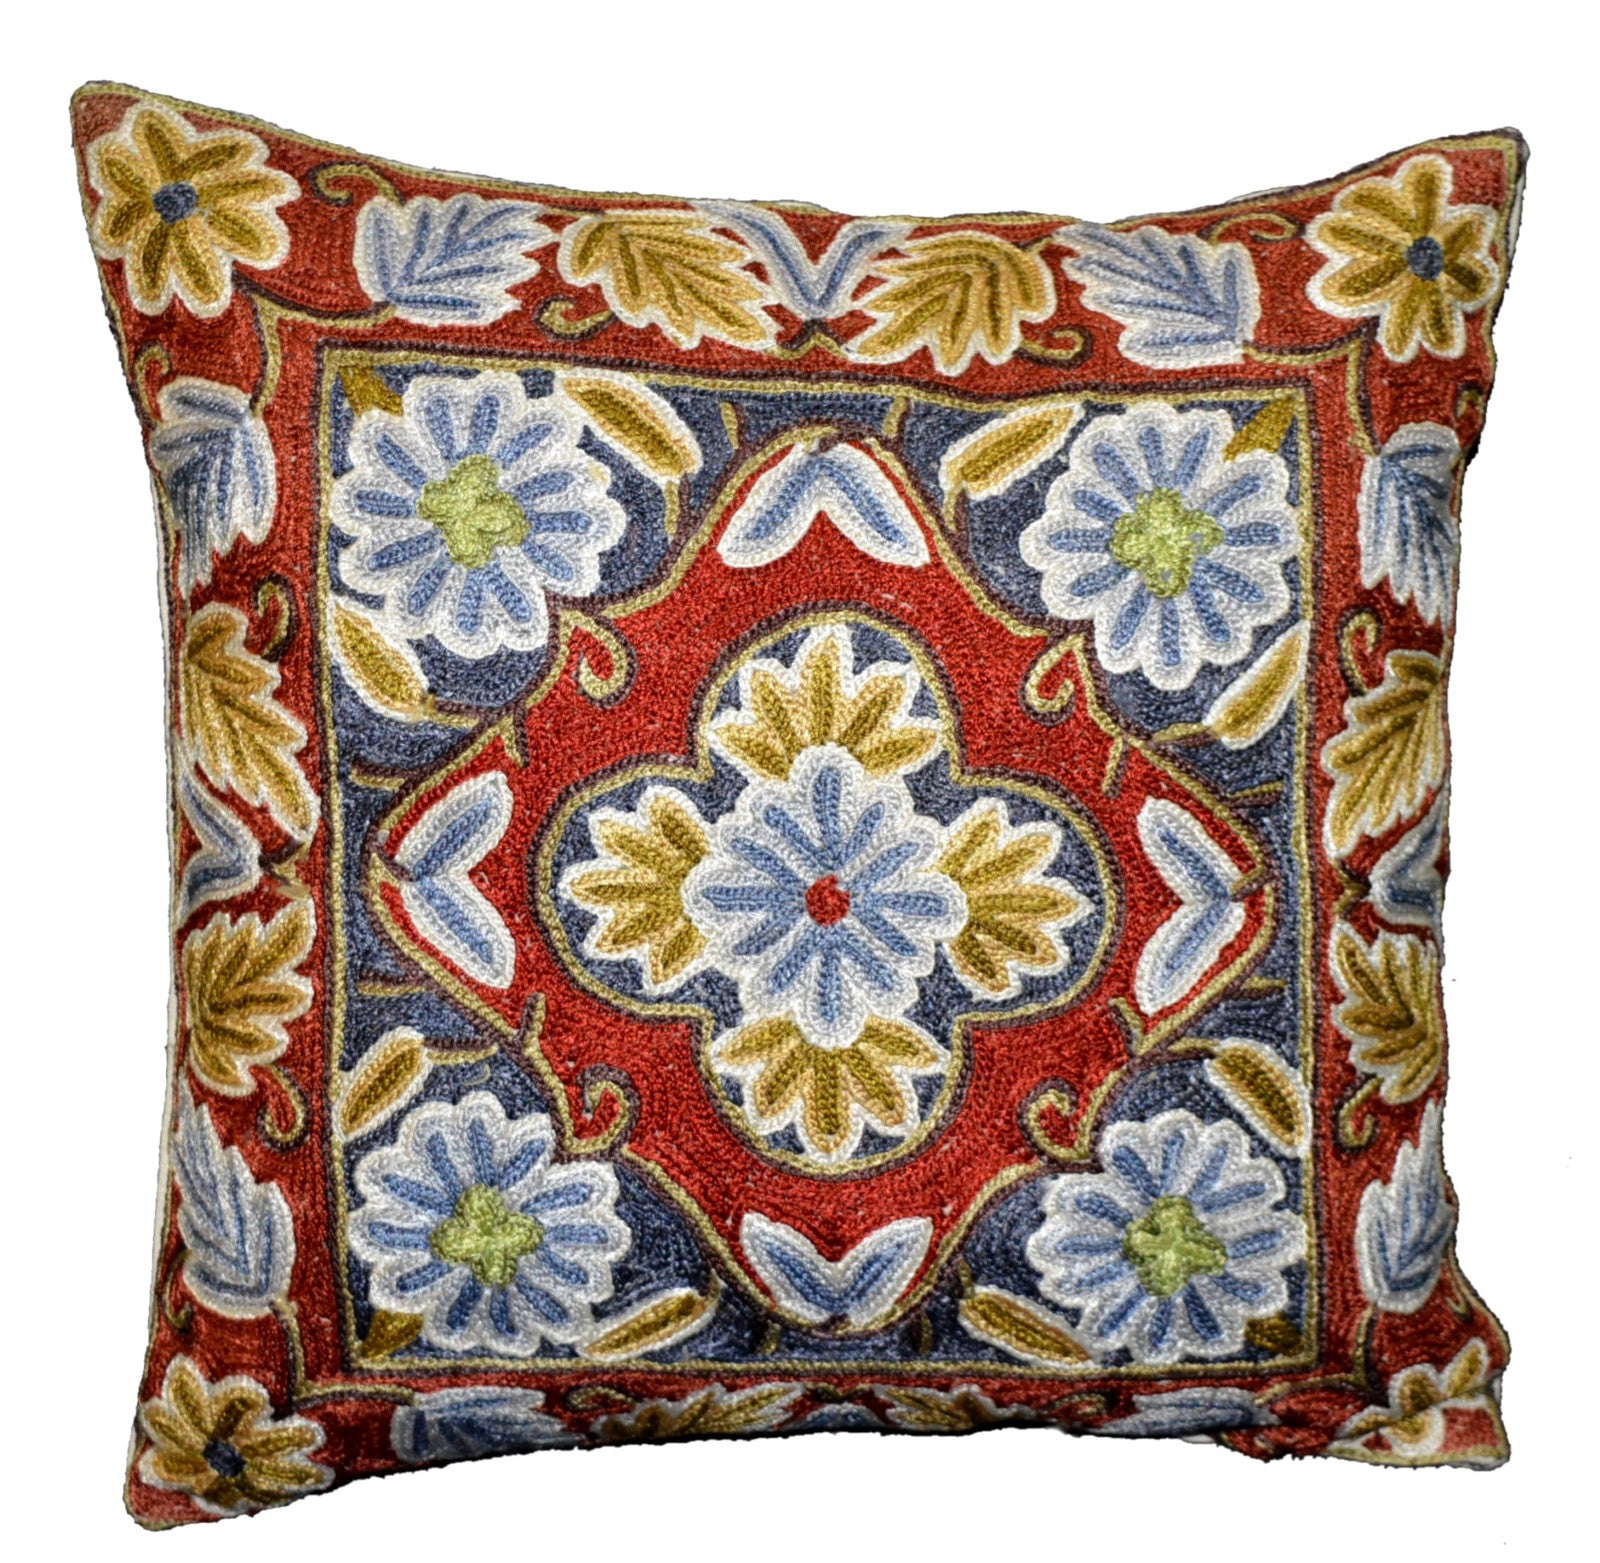 Crewel Silk Embroidered Cushion Throw Pillow Cover, Multicolor #CW2002